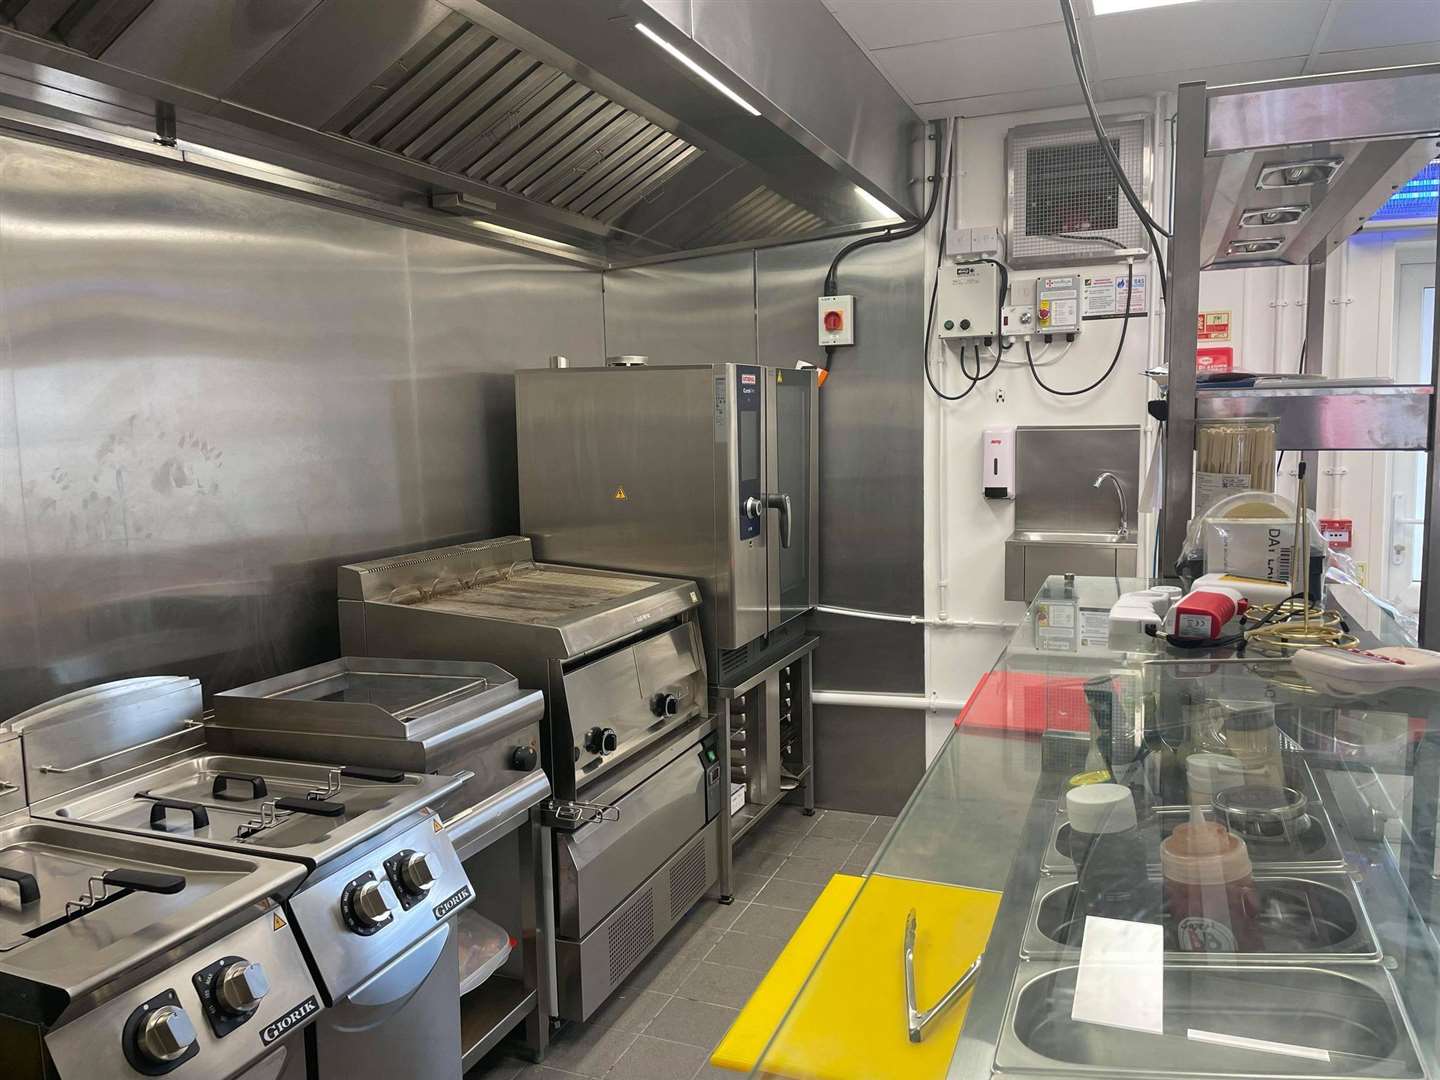 Burger Boys' kitchen is fully outfitted with new equipment